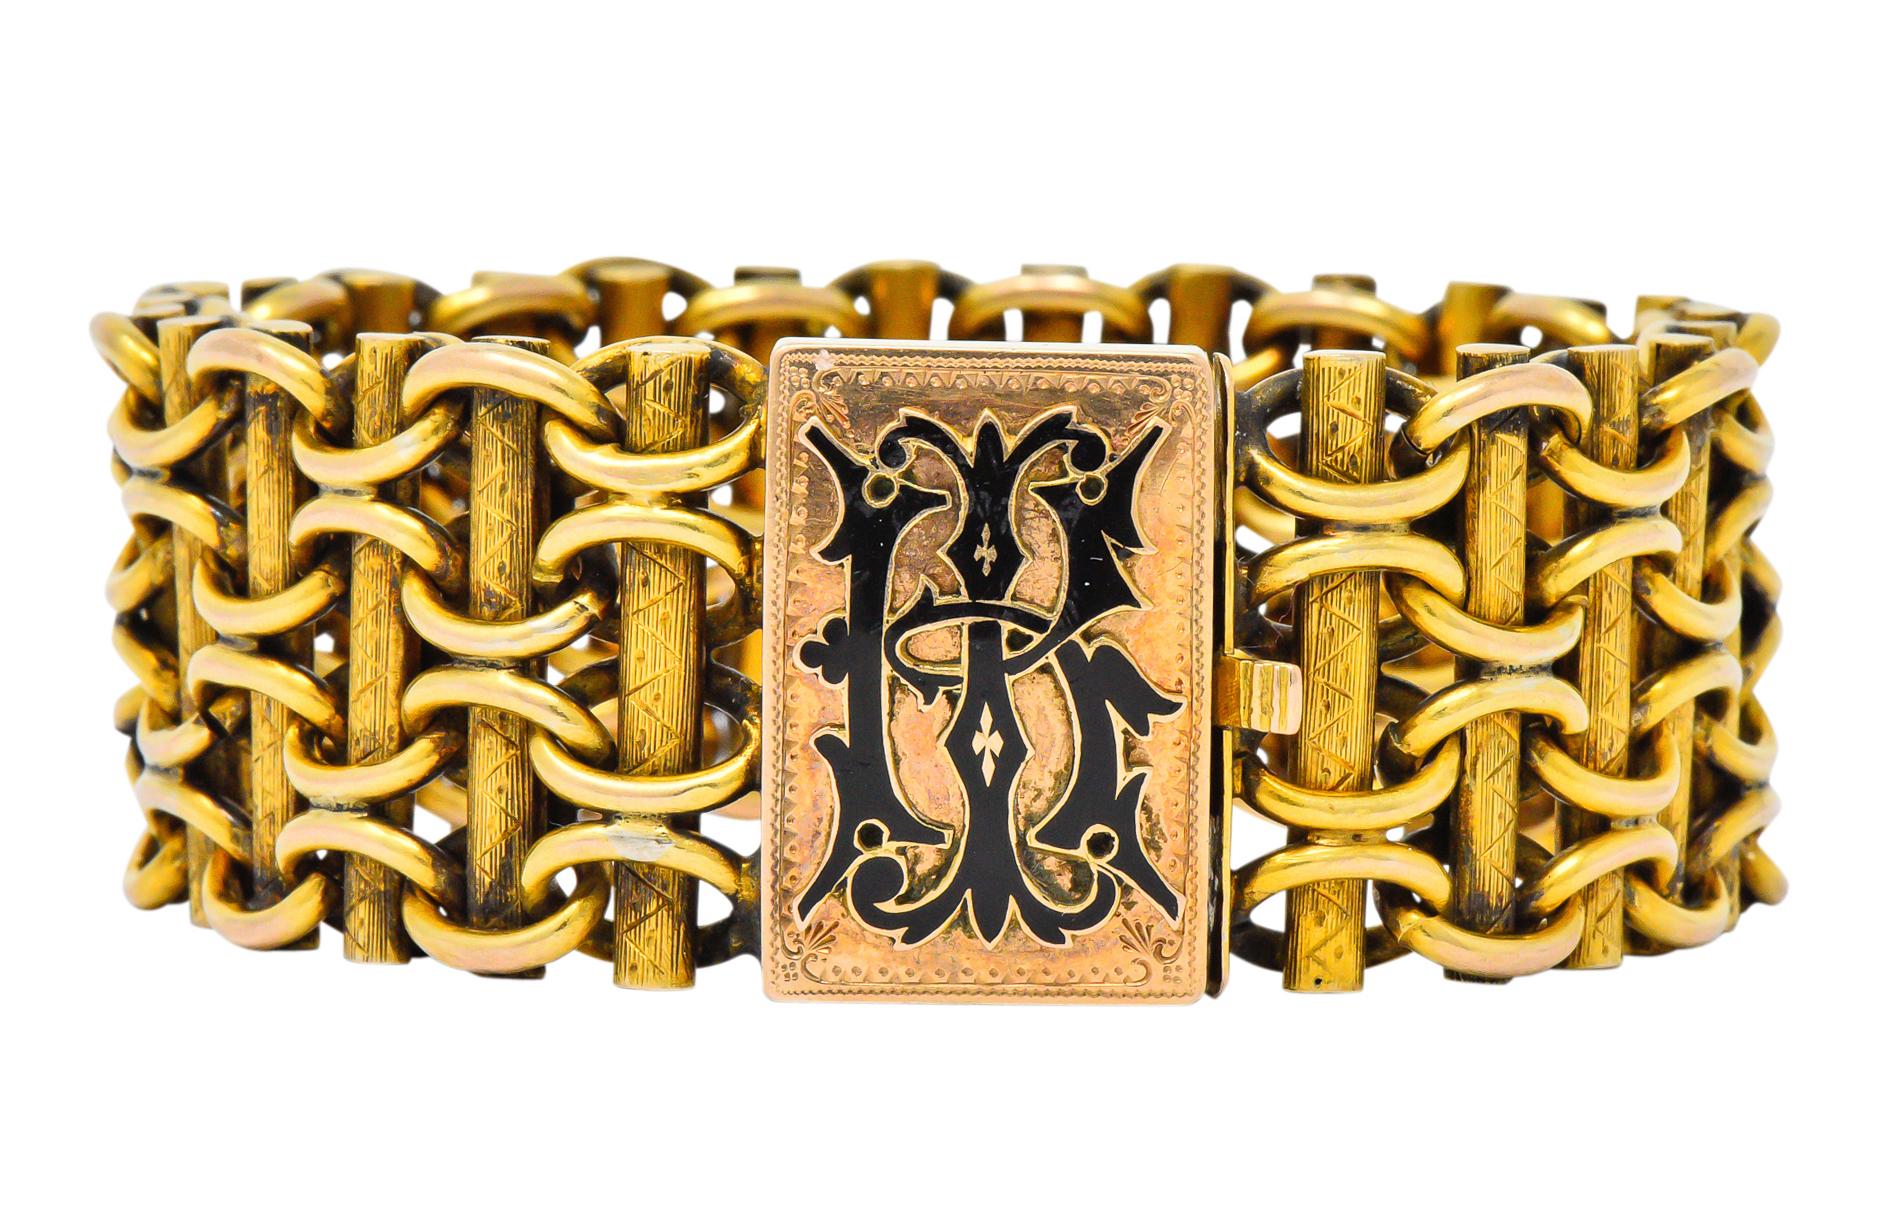 Wide decorative links, with textured gold bars threaded through polished gold links

Completed by a box clasp with raised black enamel monogram on a detailed engraved gold background 

Tested as 14 karat, stamped ‘A’ and with maker’s mark

Length: 7